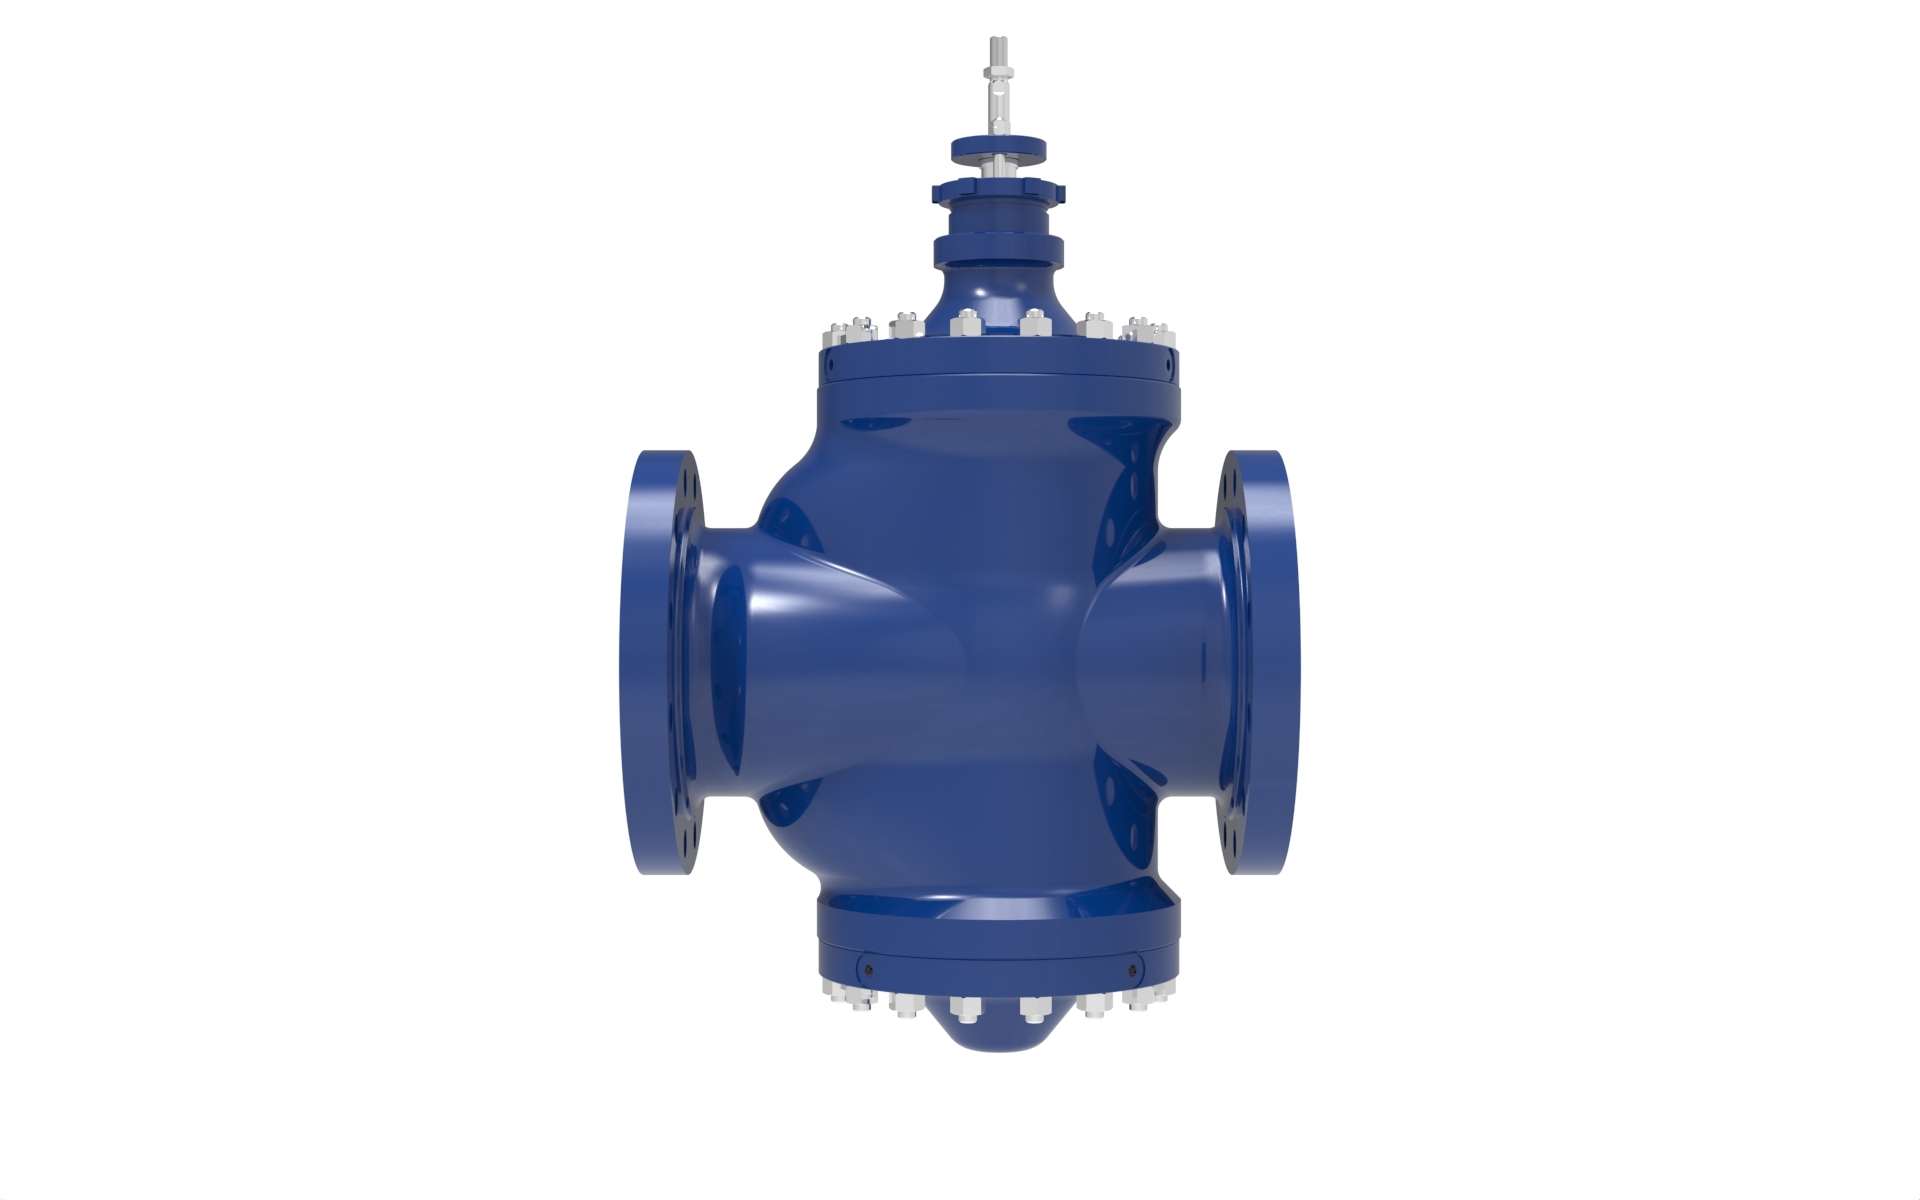 Right side view of a Blakeborough BV800 Contour Trim Valve manufactured by Trillium Flow Technologies